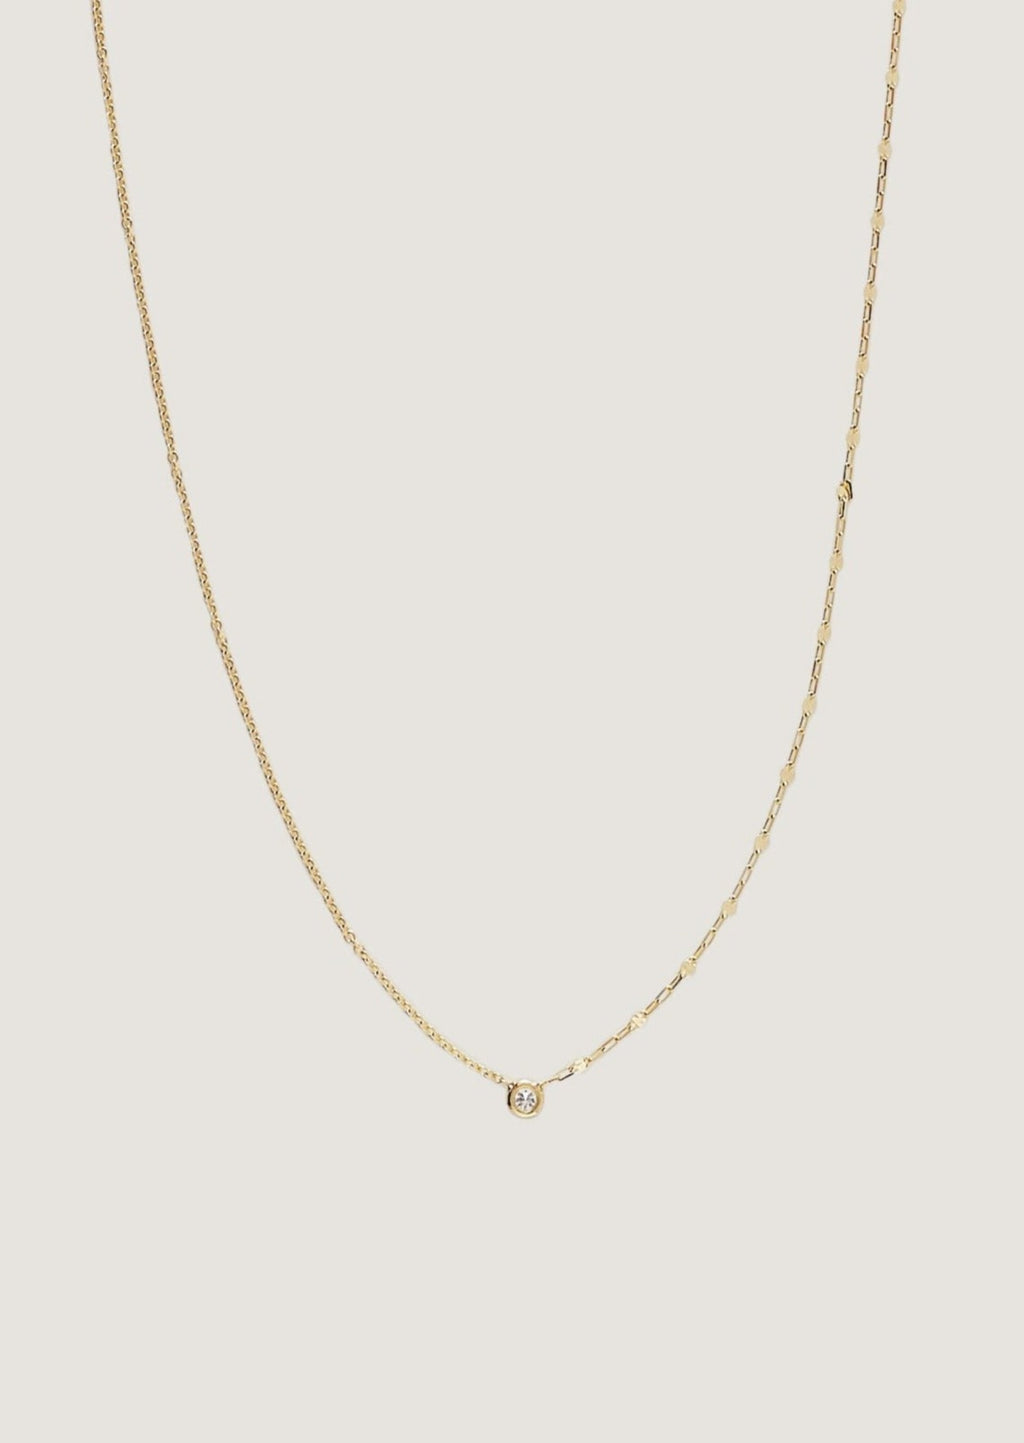 alt="Two in one round diamond necklace"